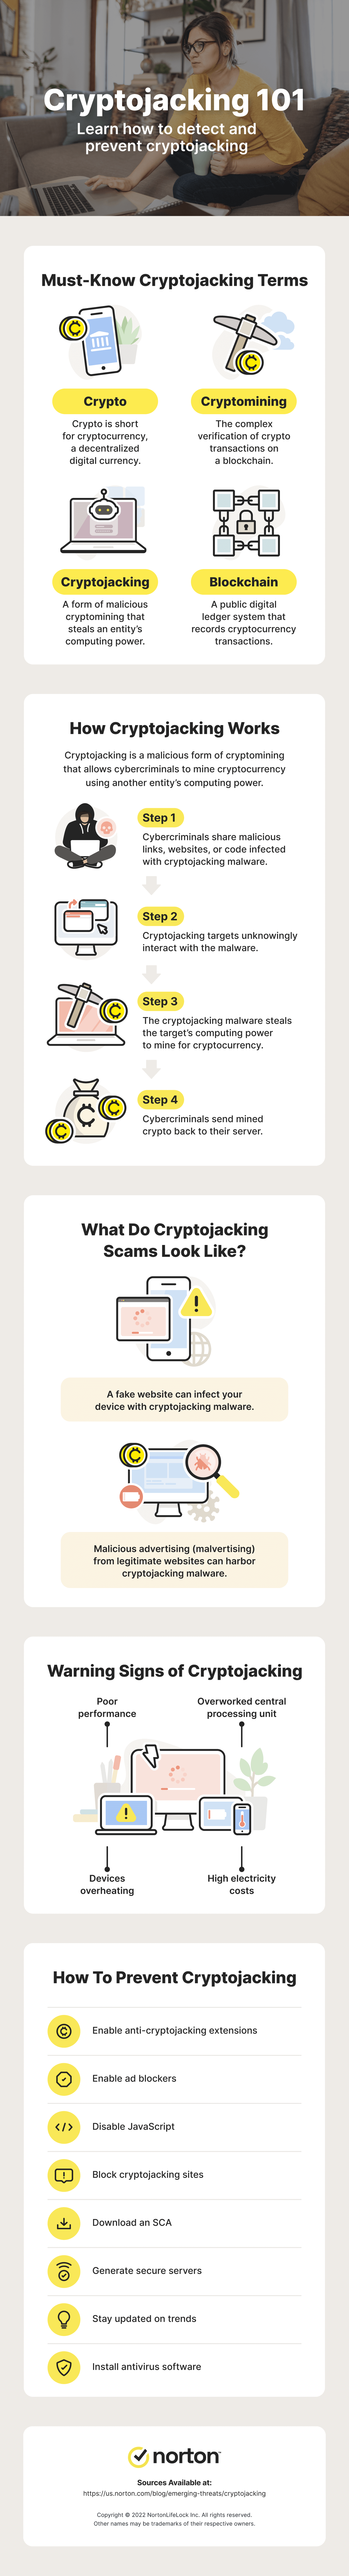 An infographic covers the basics of cryptojacking, ranging from types of scams to prevention tips.